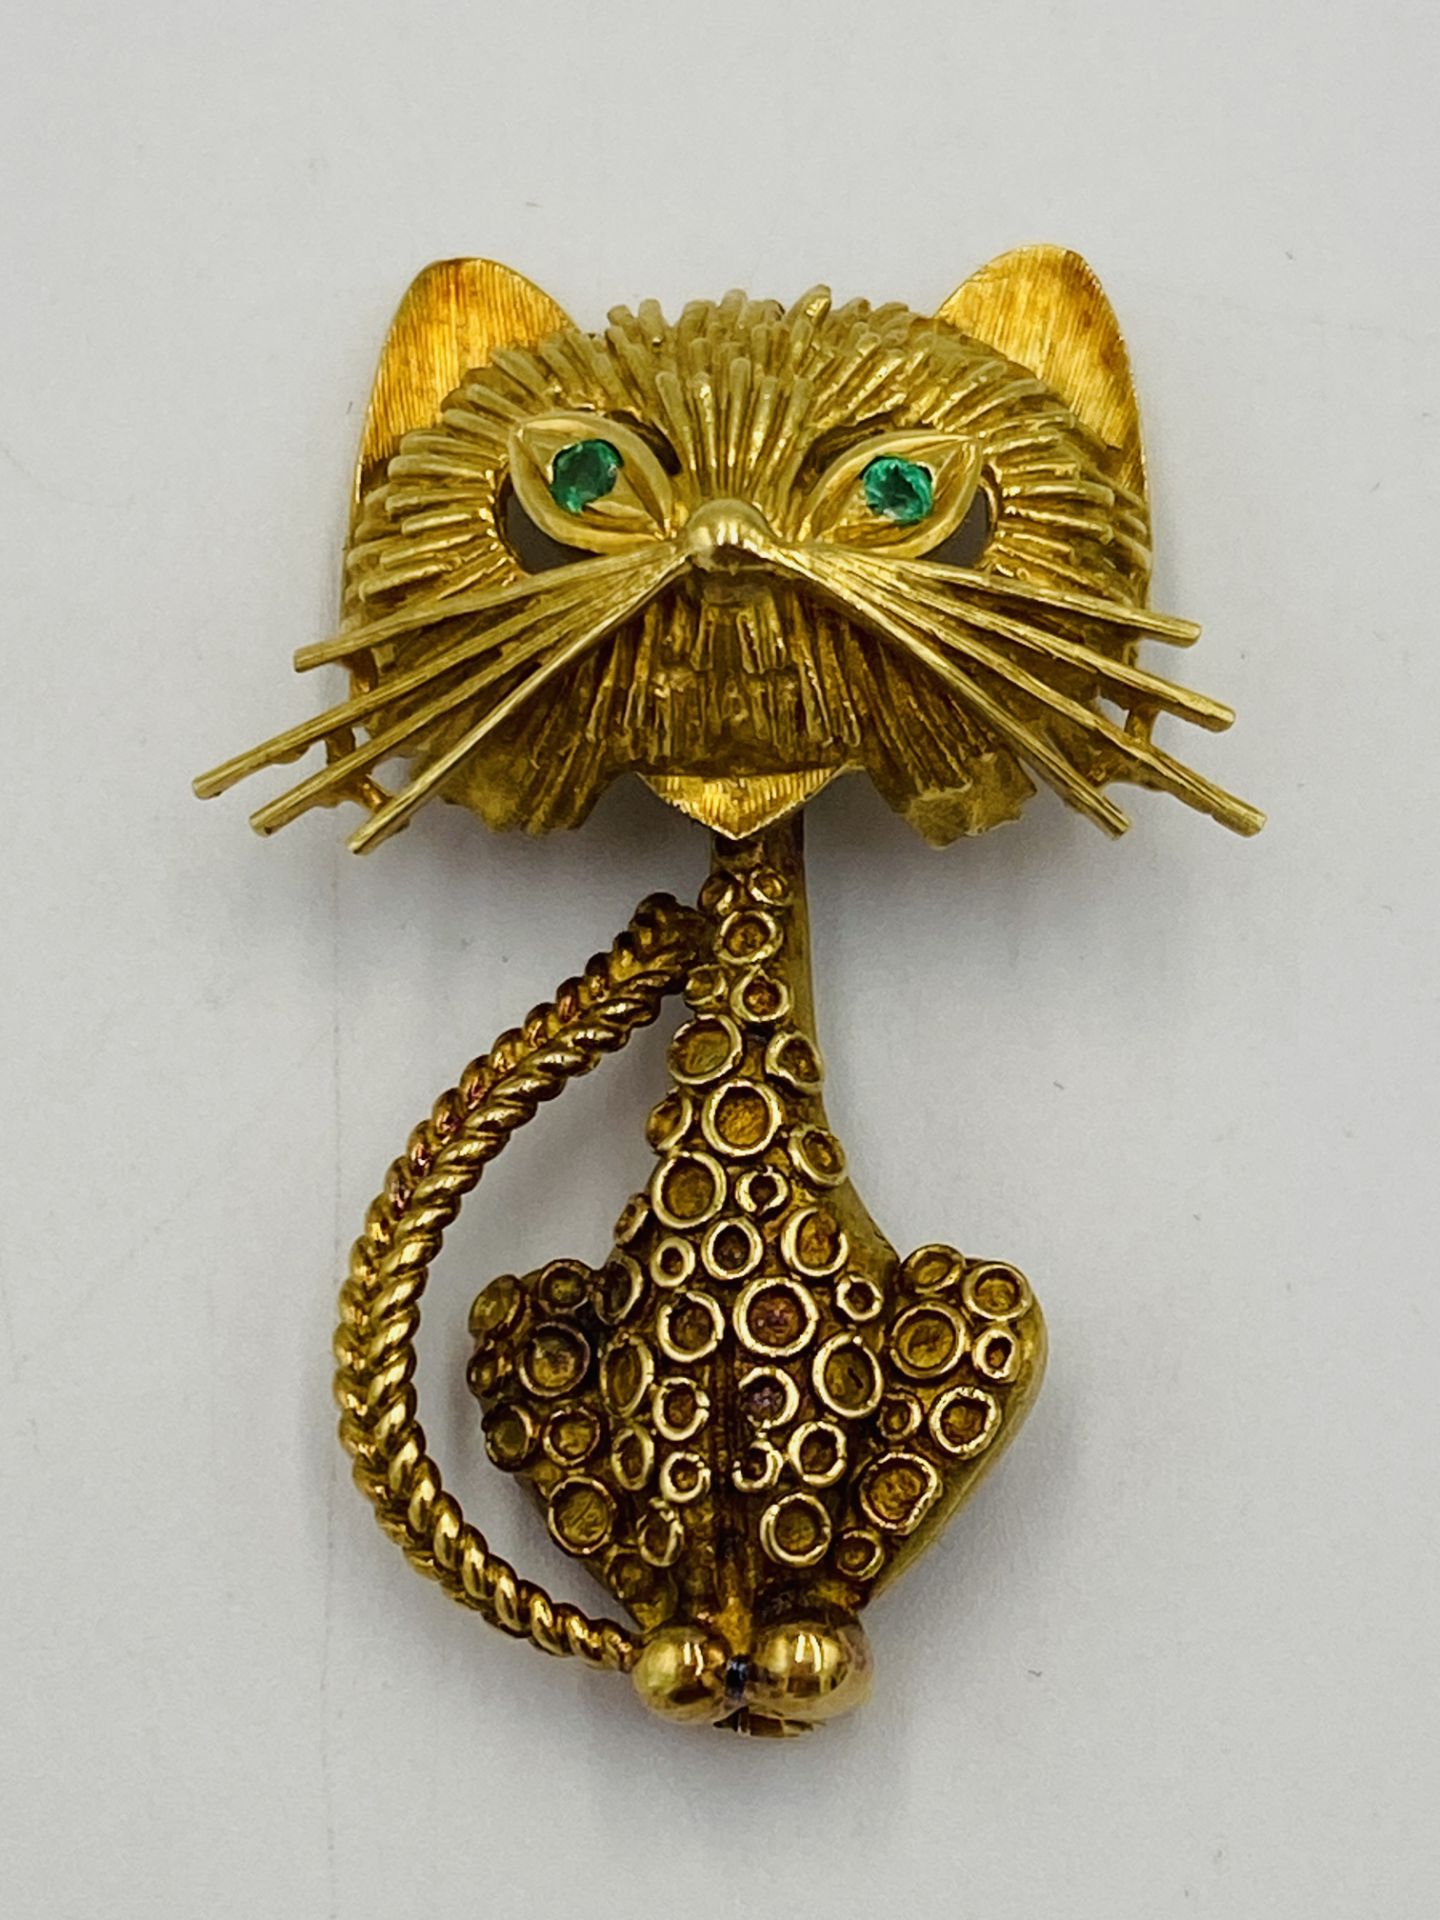 18ct gold Garrards cat brooch set with emerald eyes - Image 2 of 6